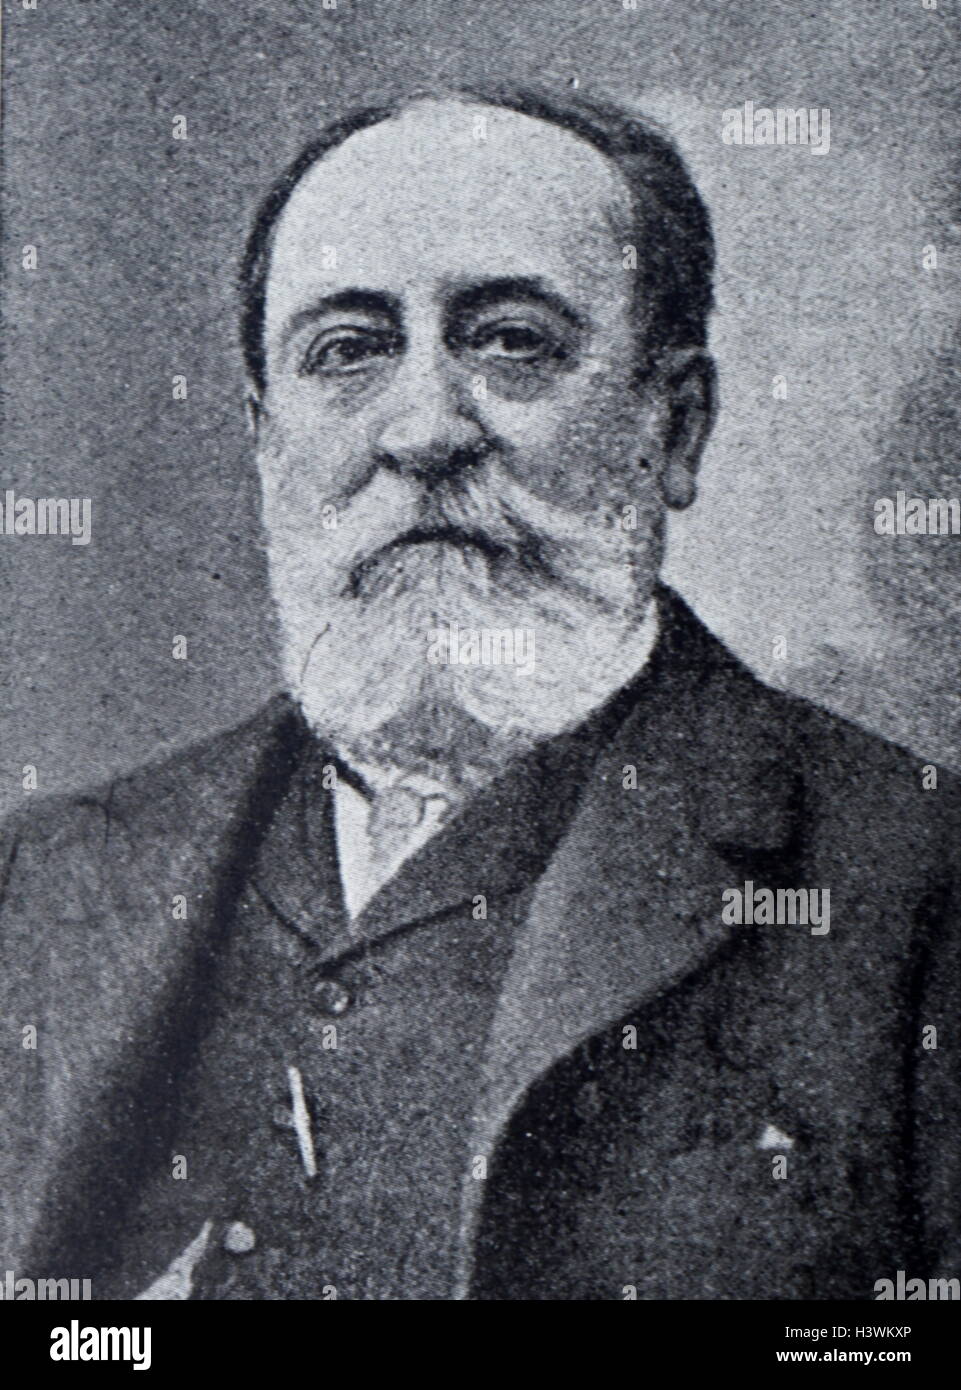 BBC Radio 3 - Composer of the Week, Camille Saint-Saëns (1835-1921)